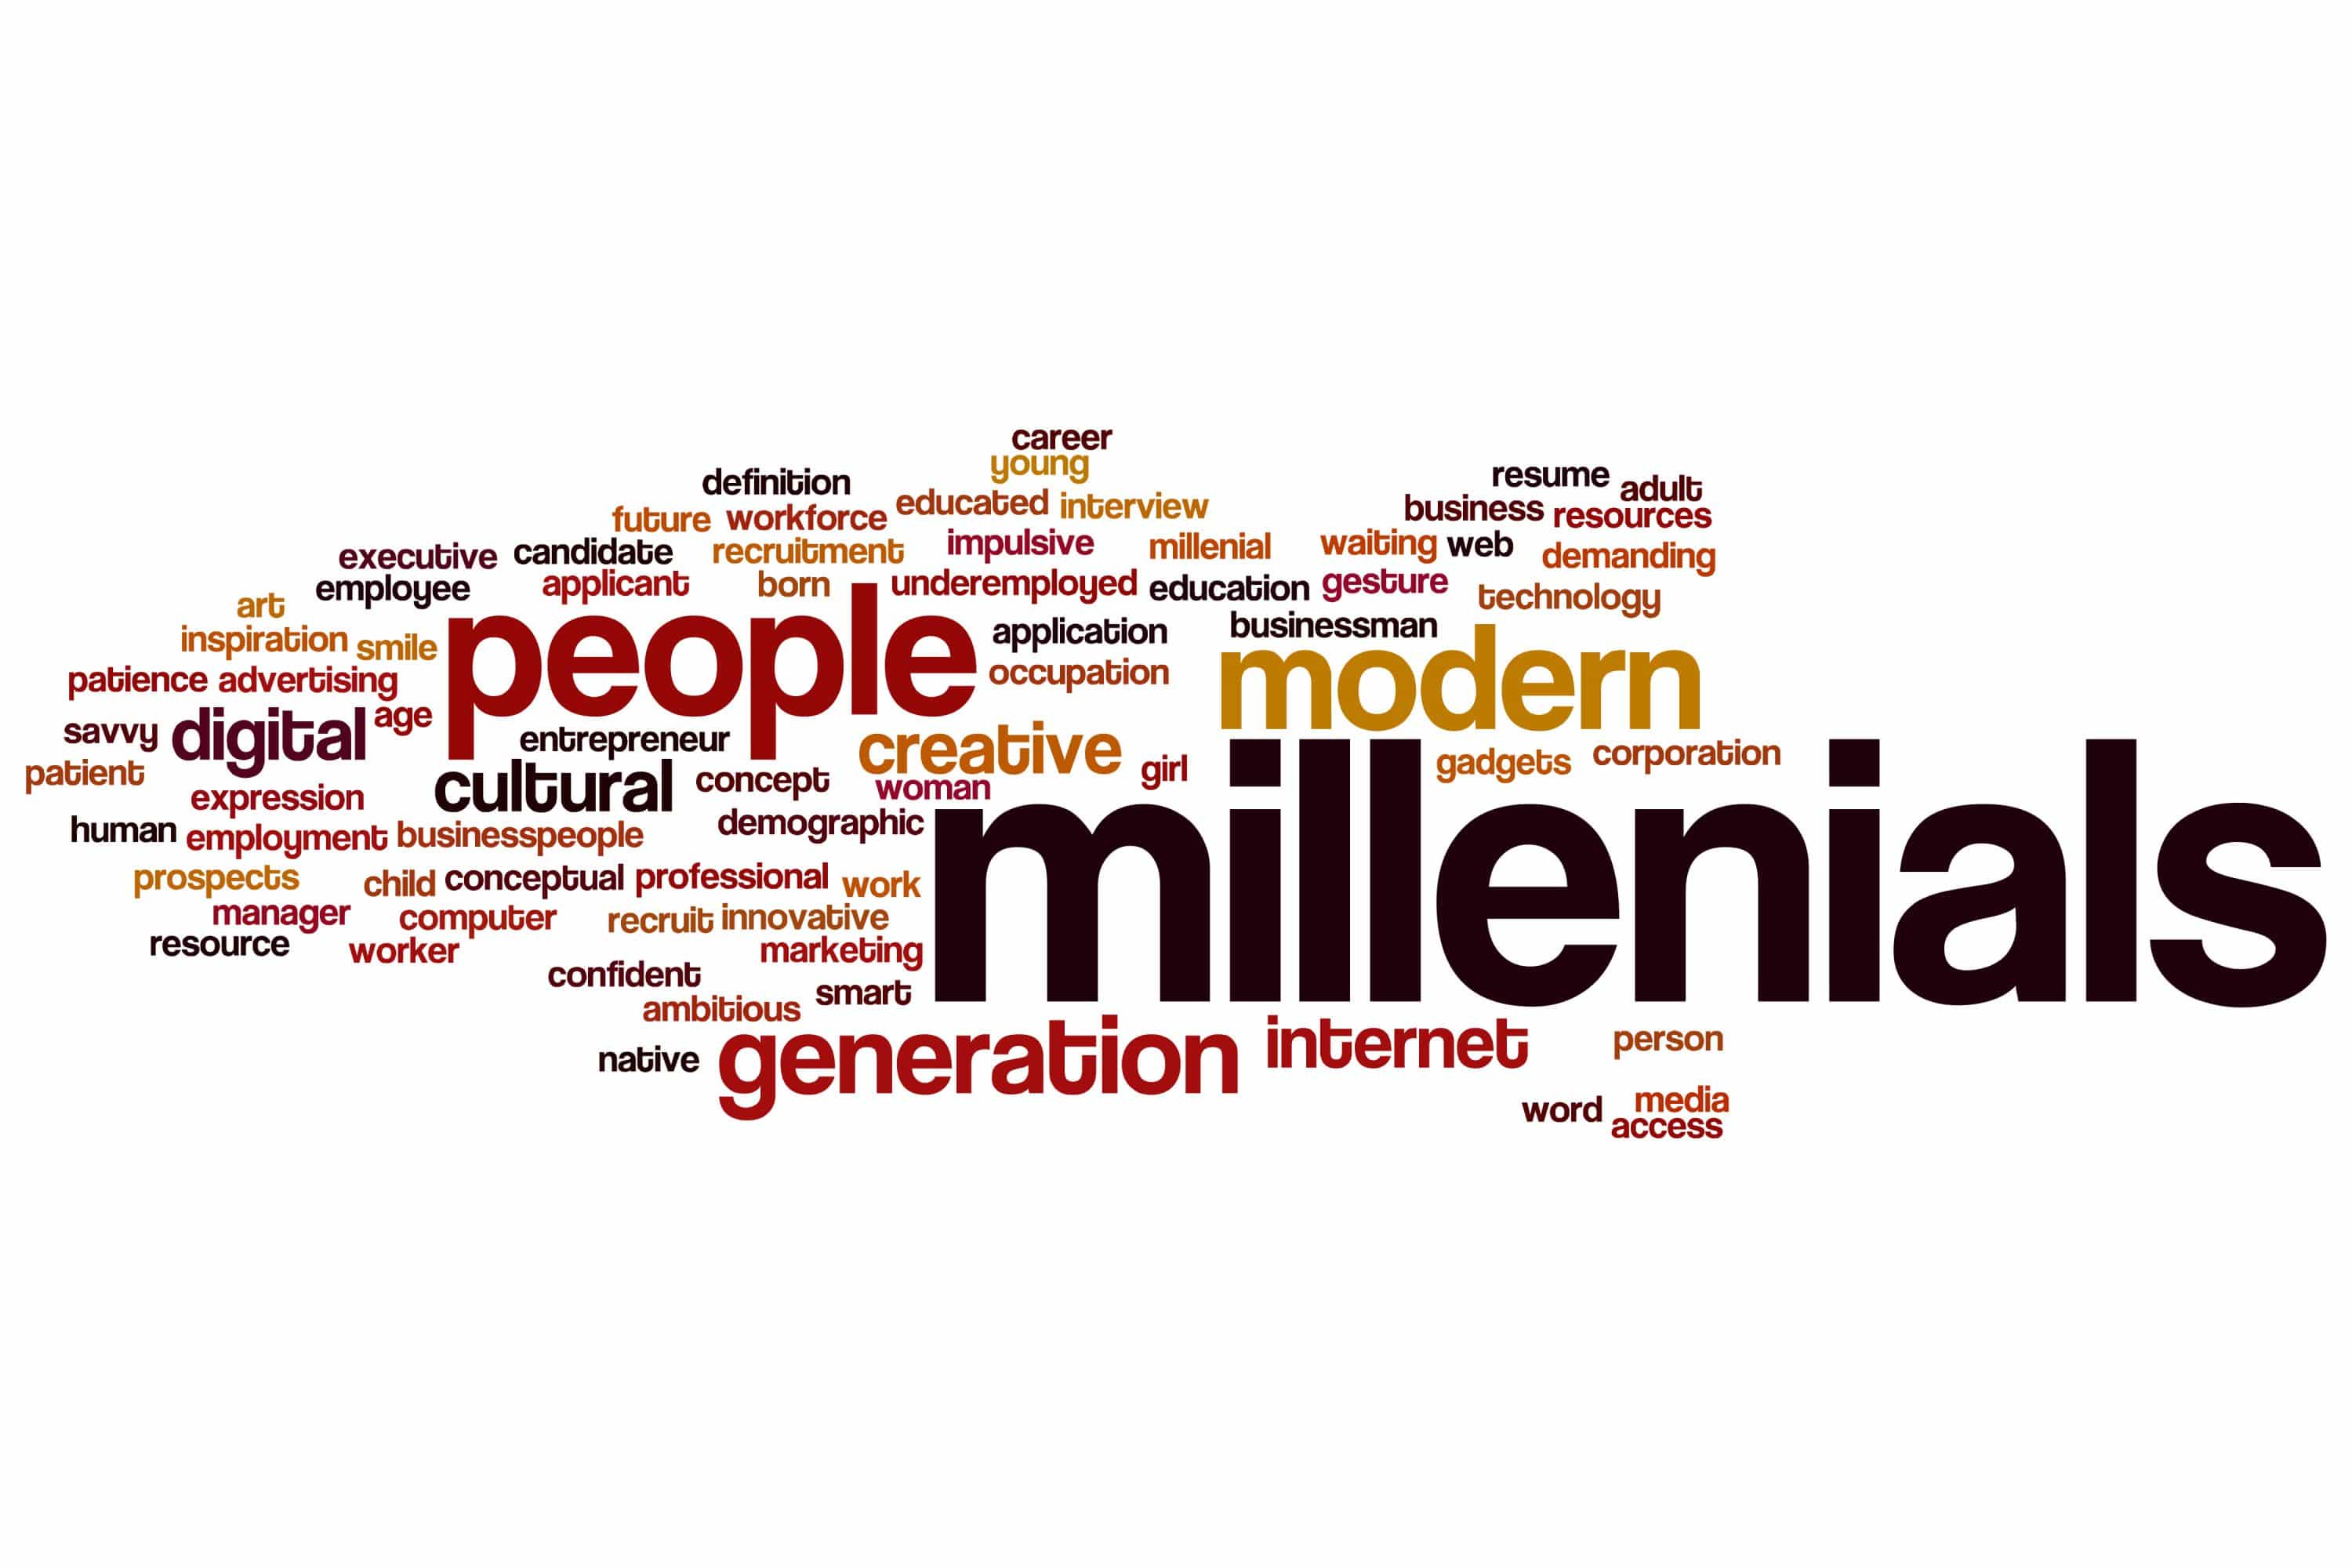 Word Generation. Personality Word cloud. Occupation ads. Web waited